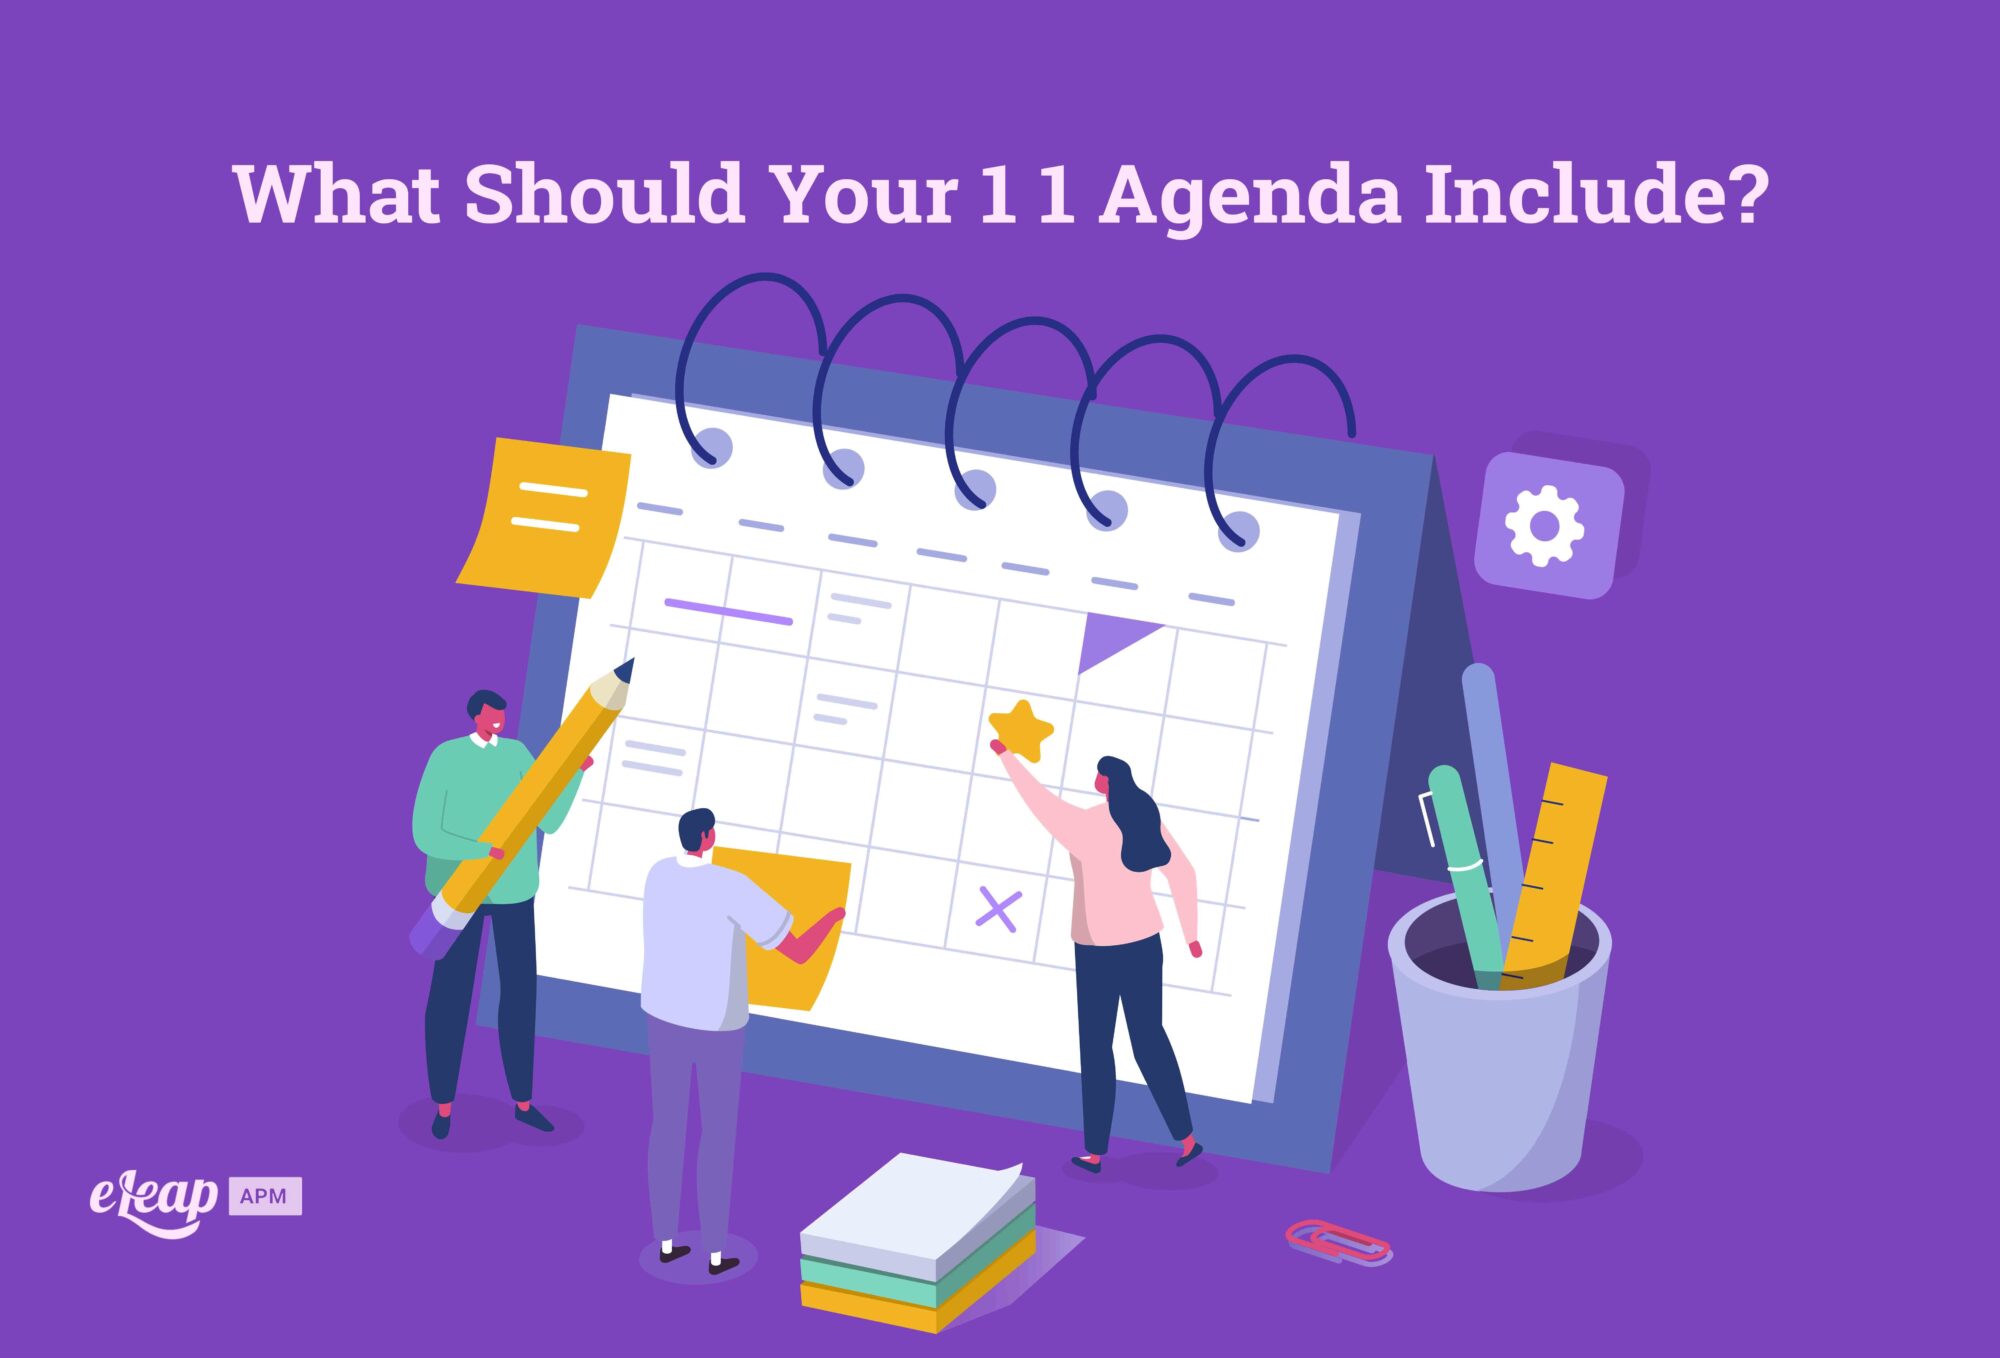 What Should Your 1 1 Agenda Include?